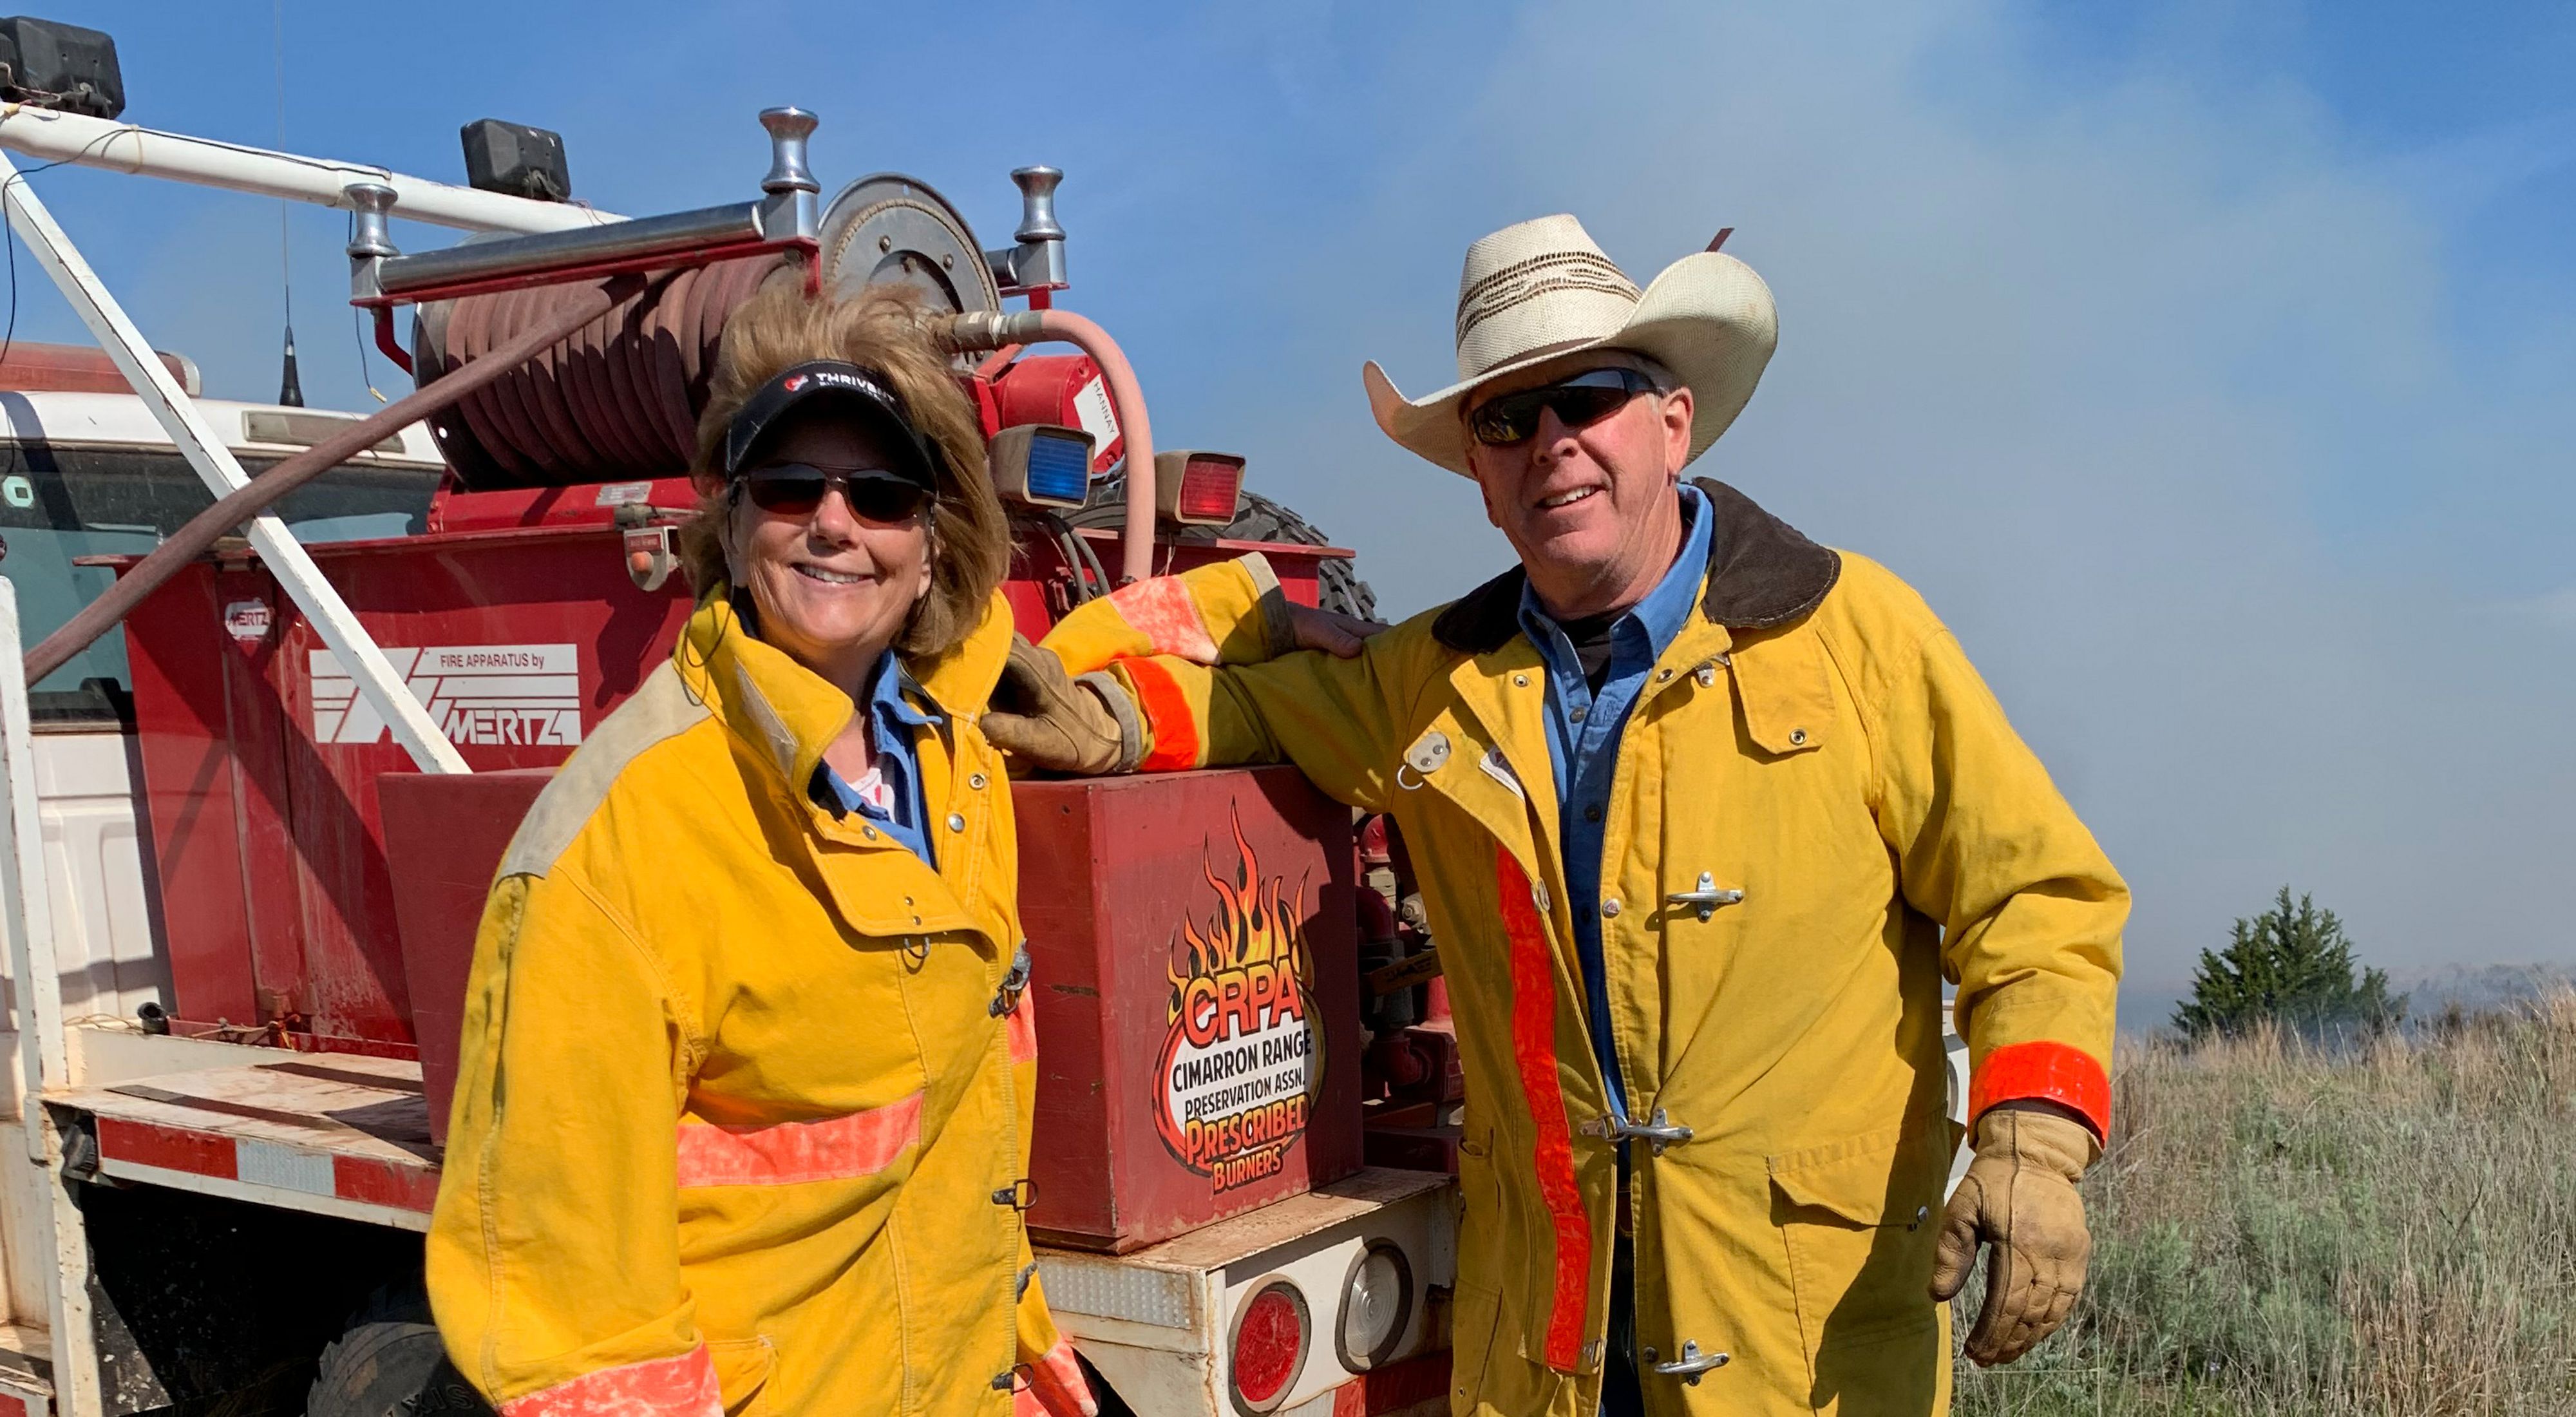 Man and women dressed in protective fire gear stand in front of a utility truck during a prescribed burn on a ranch.